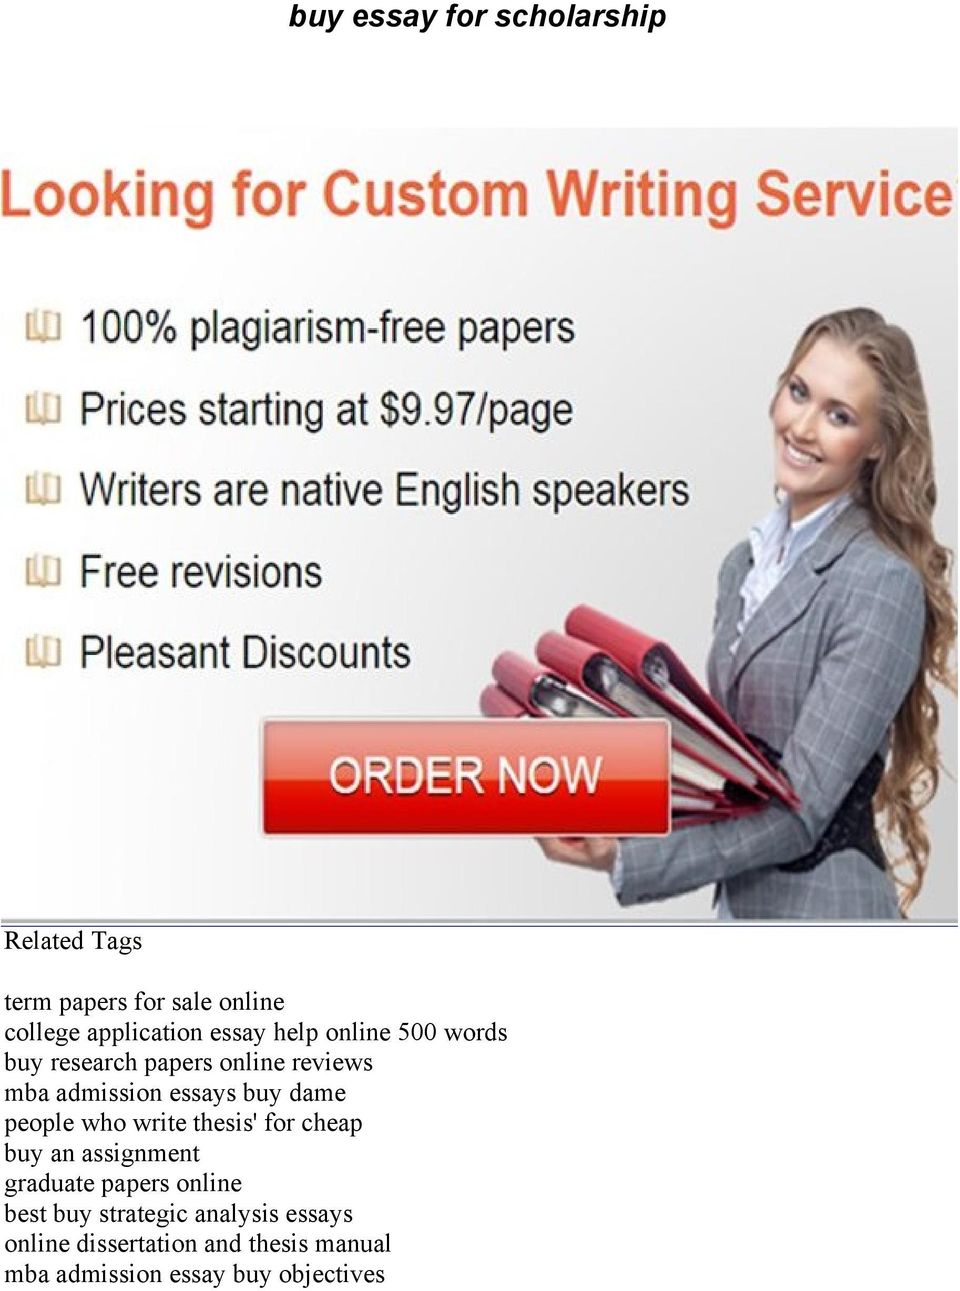 dame people who write thesis' for cheap buy an assignment graduate papers online best buy